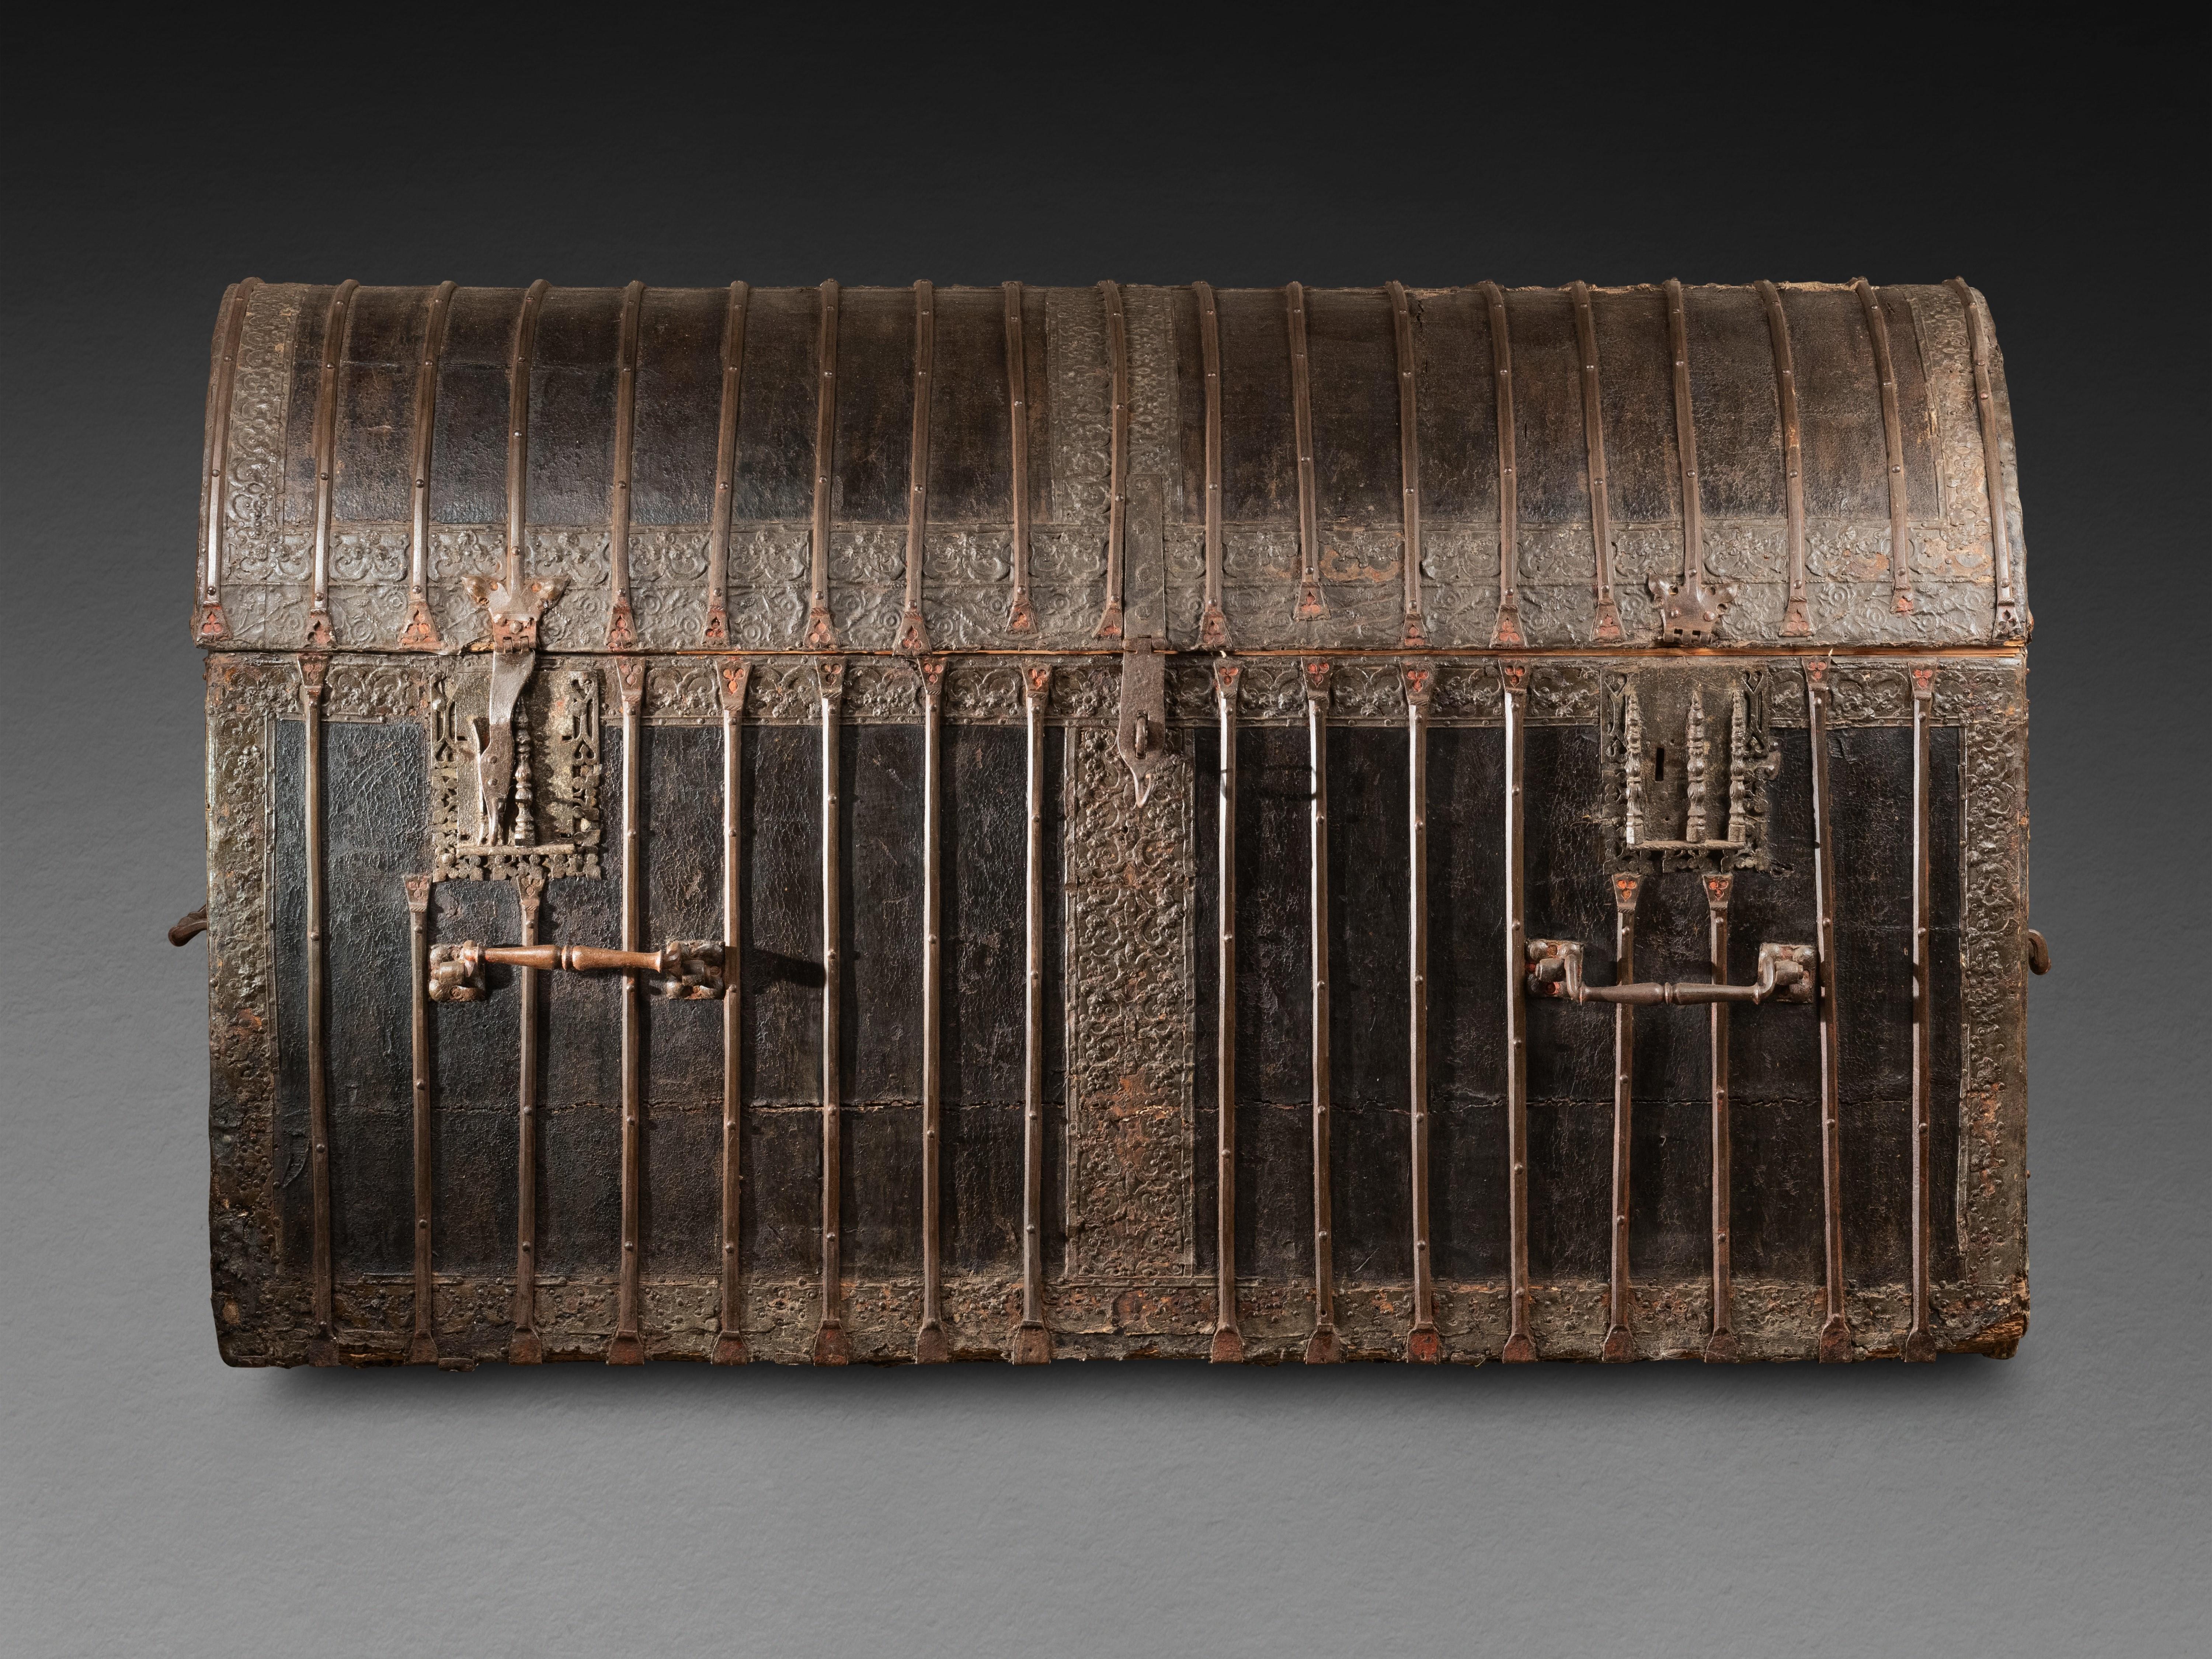 Large leather and iron bound travel chest, very rare in its dimensions
Late 15th century, Northern France
Dimensions: h.103 cm, w. 178 cm, d. 77cm ( (H. 40.55 in, w. 70.08 in. d. 30.31 in)

Our rectangular-shaped chest opens with a rounded lid. It